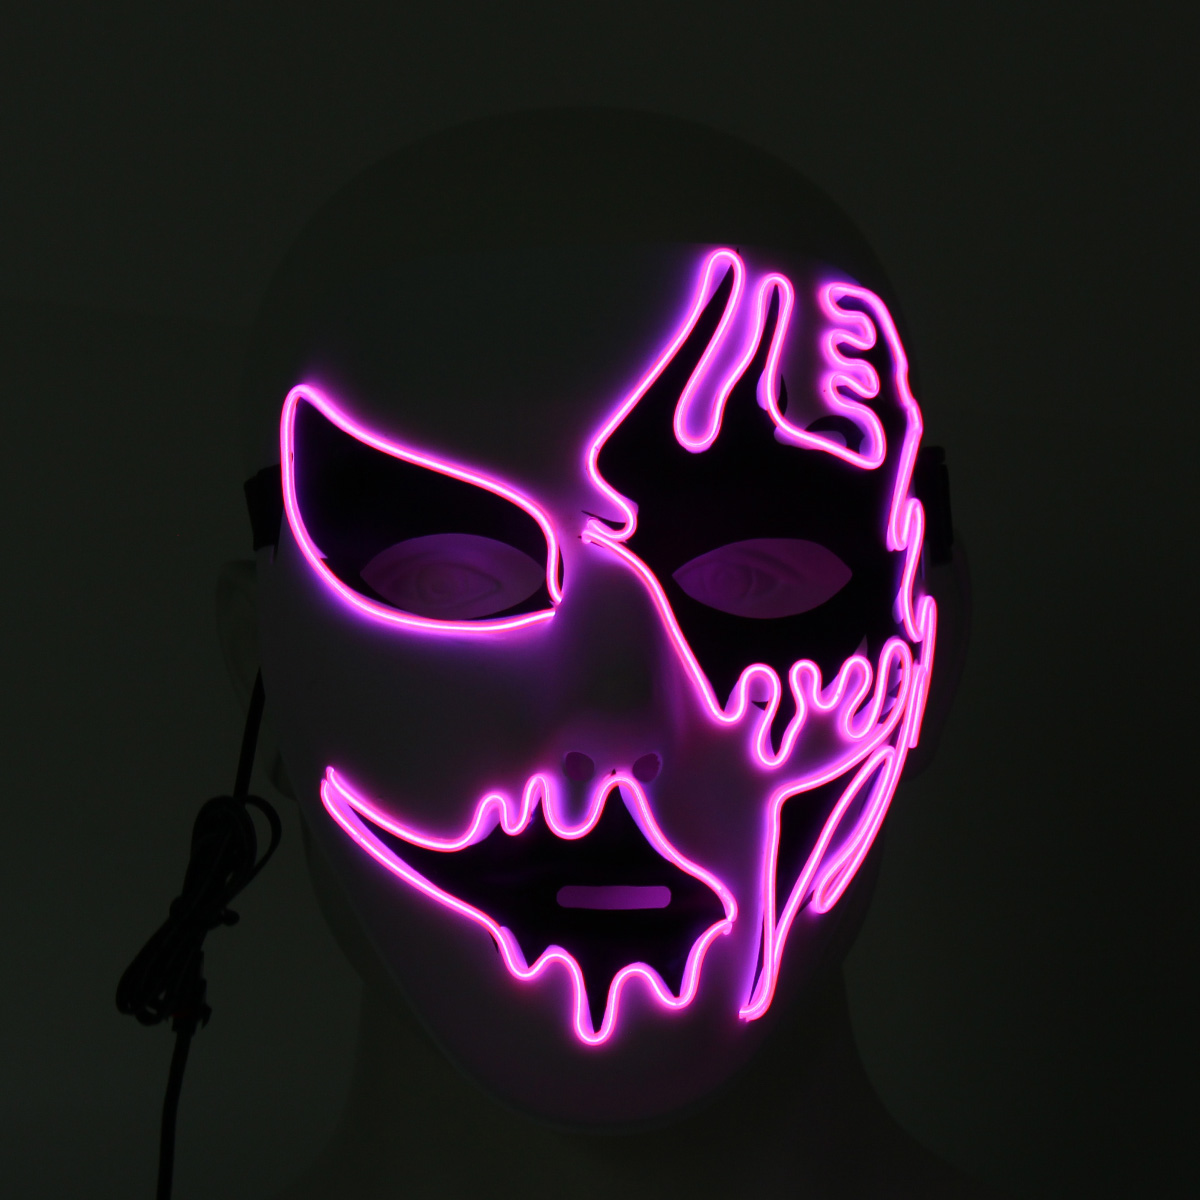 LED Light up Mask Cosplay Glowing in The Dark Mask Costume 3 Lighting Modes Sago Brothers Scary Halloween Mask Pink Halloween Face Masks for Men Women Kids 